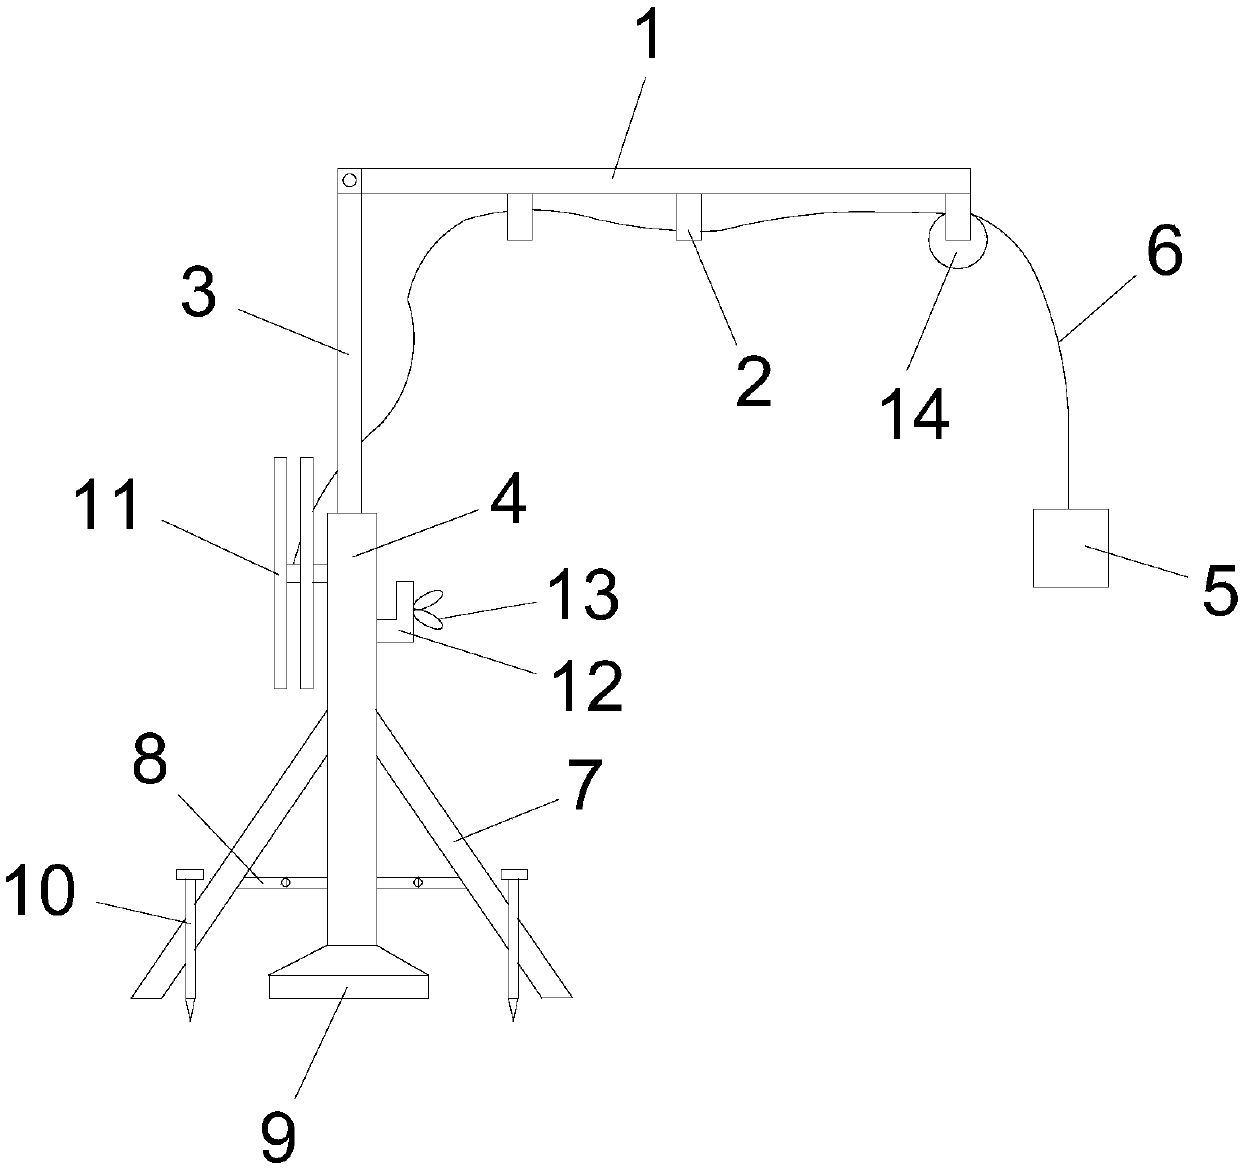 VR equipment suspension frame with guiding wheel